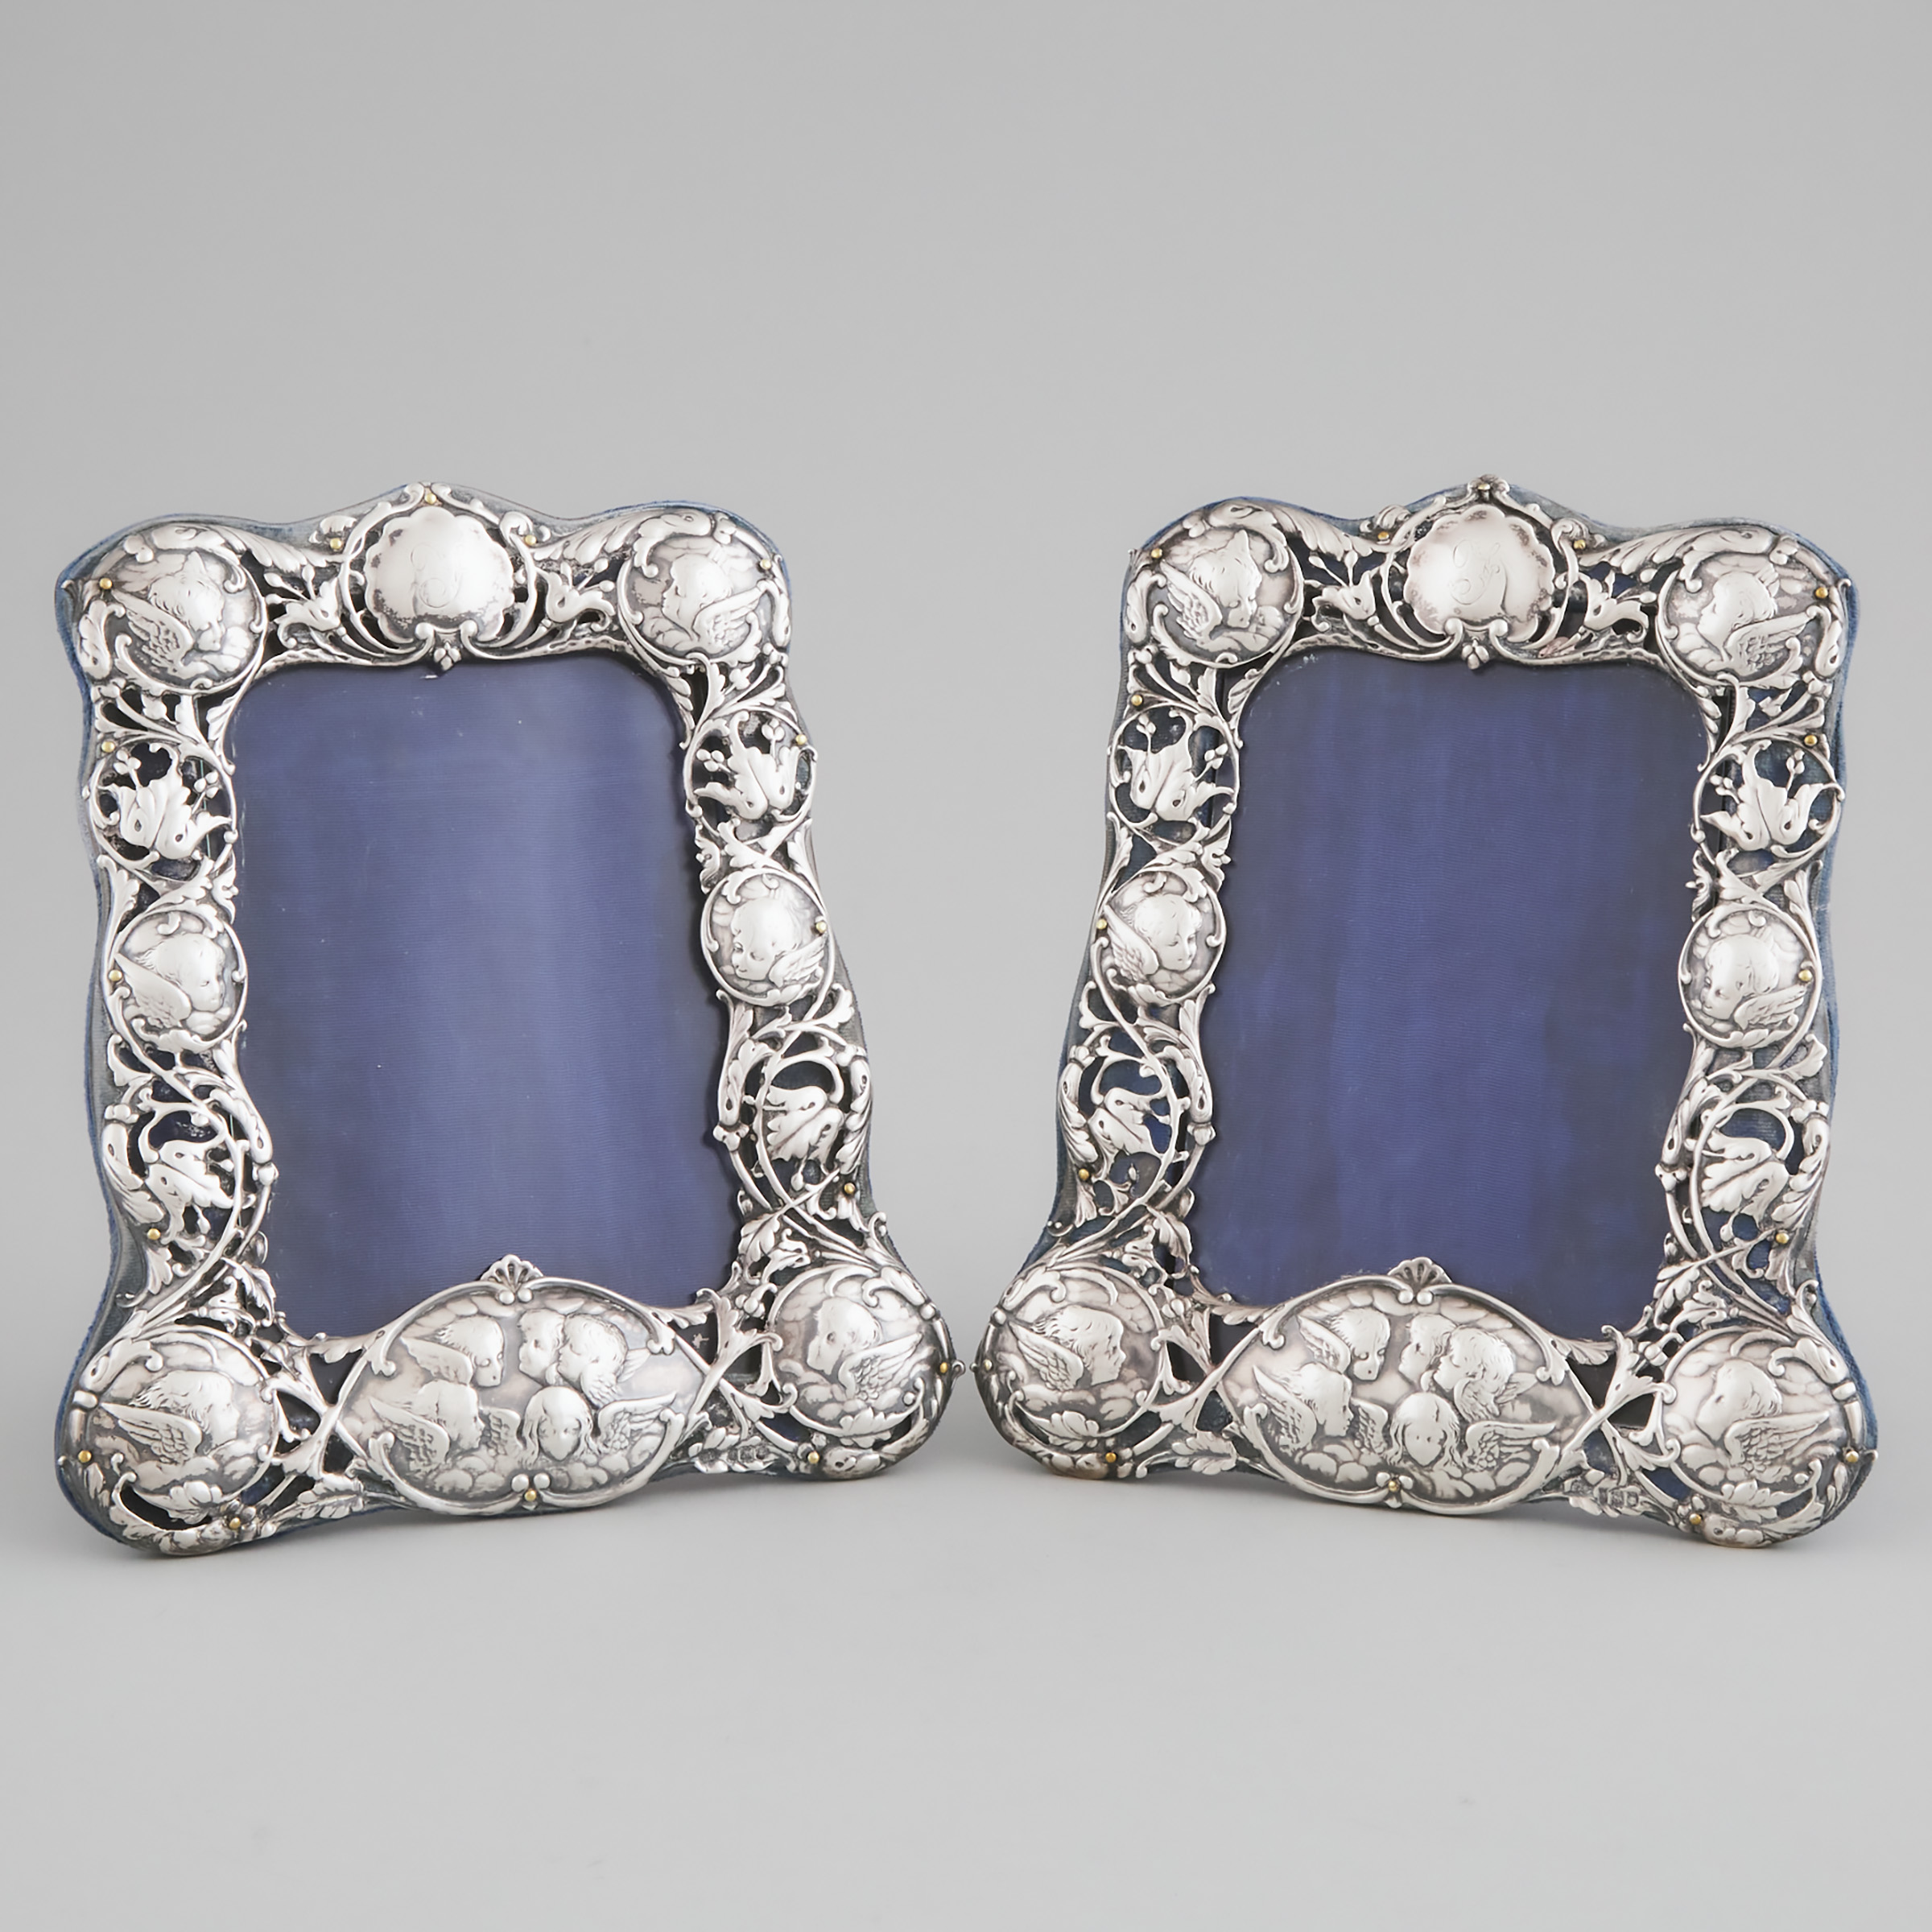 Pair of Edwardian Silver Photo Frames, William Comyns & Sons, London, 1901